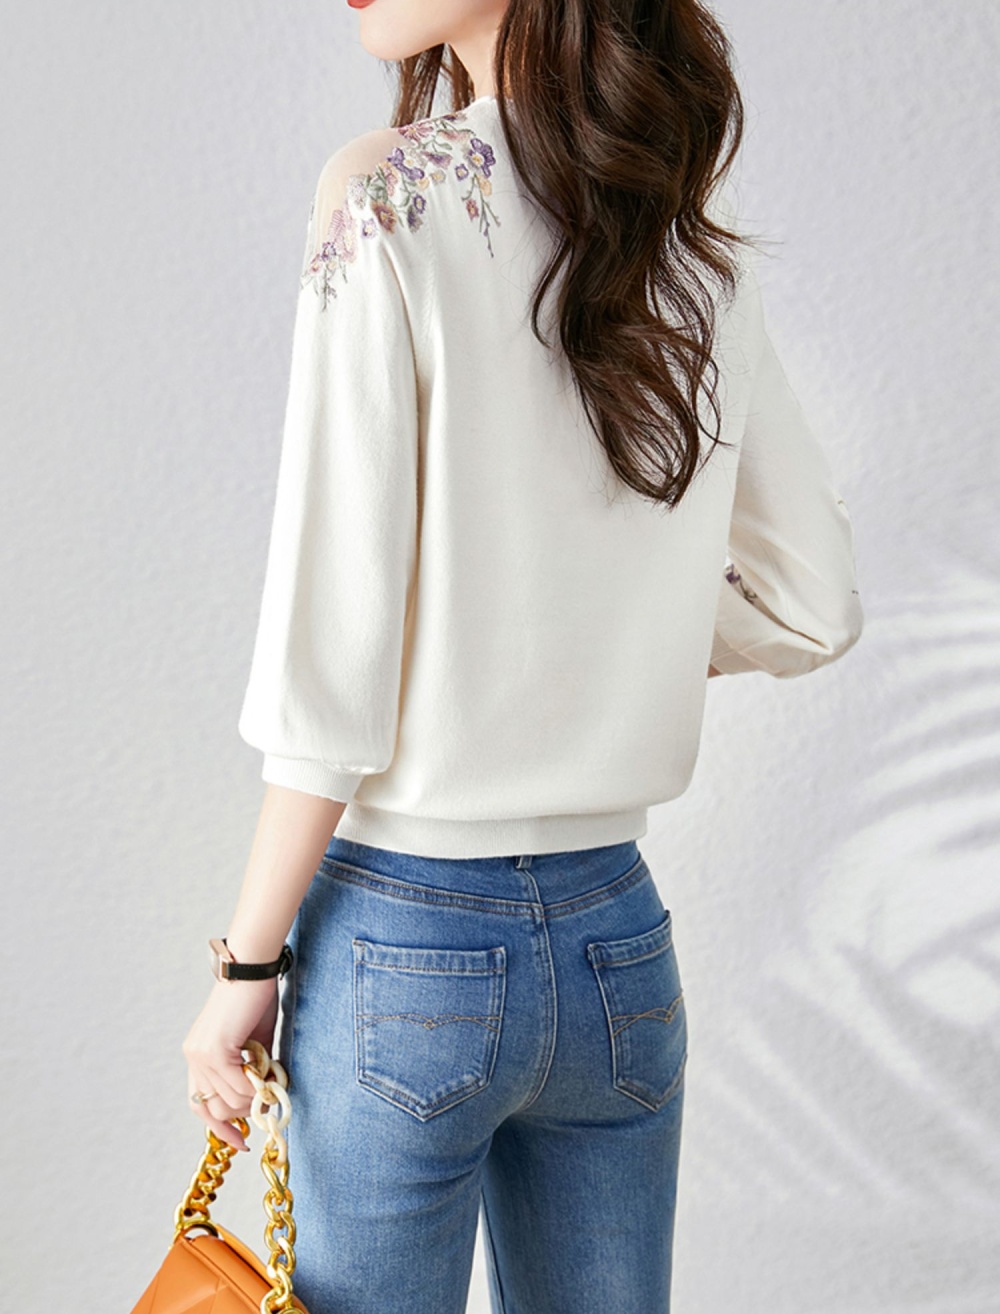 Flowers hollow sweater round neck refreshing tops for women